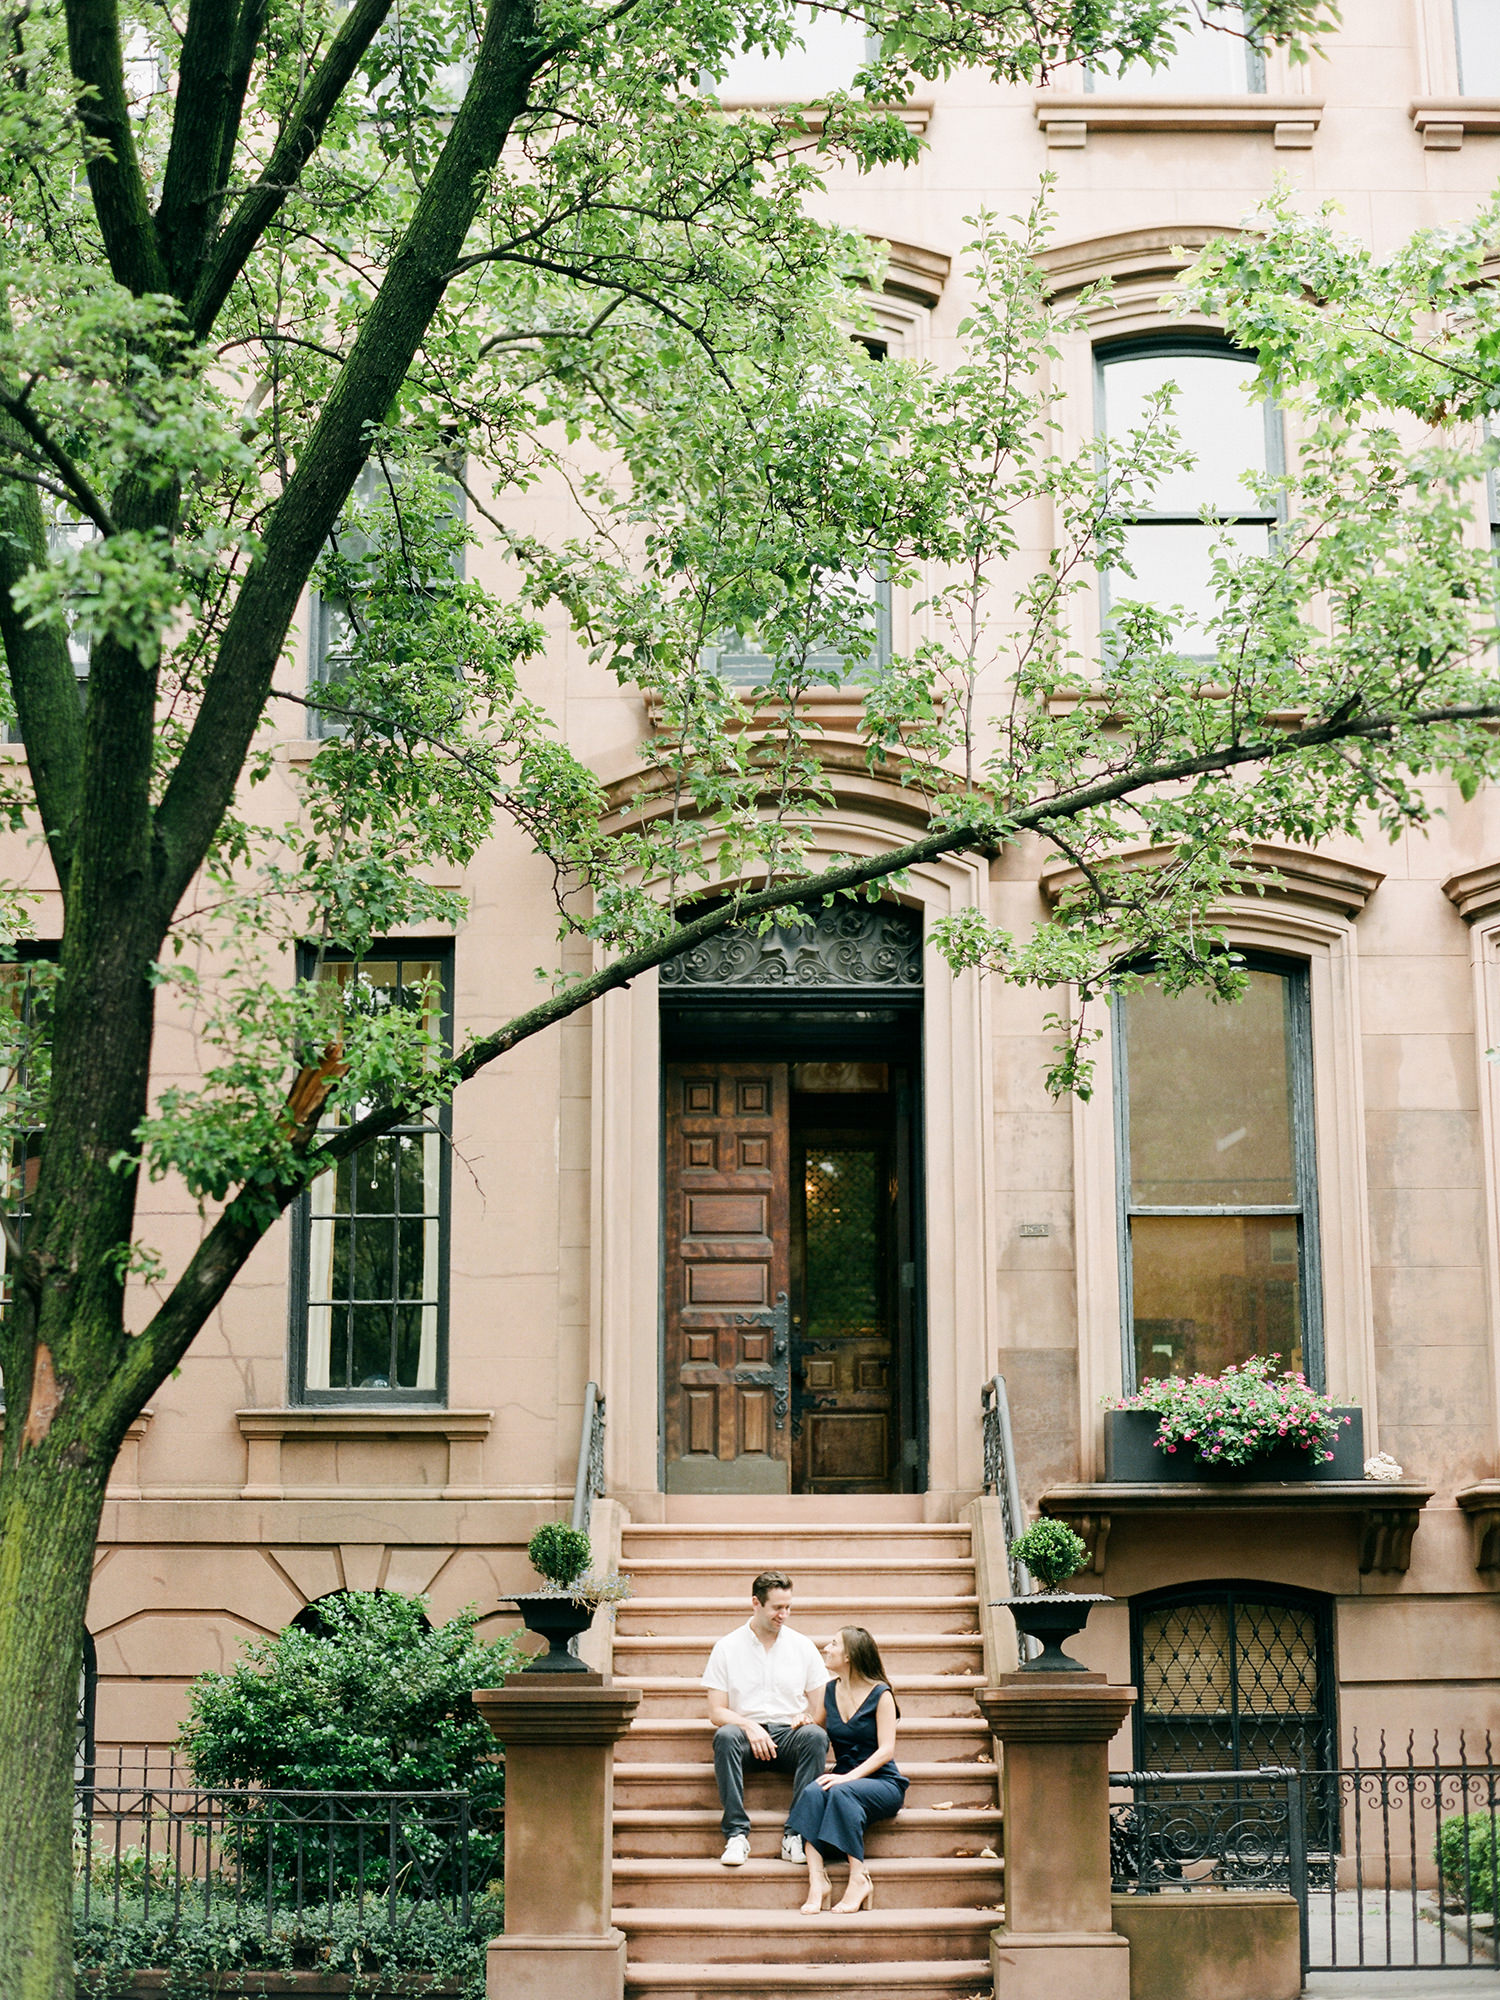 Brooklyn Heights Brownstone engagement photo with couple sitting on steps. Film photograph by Mary Dougherty